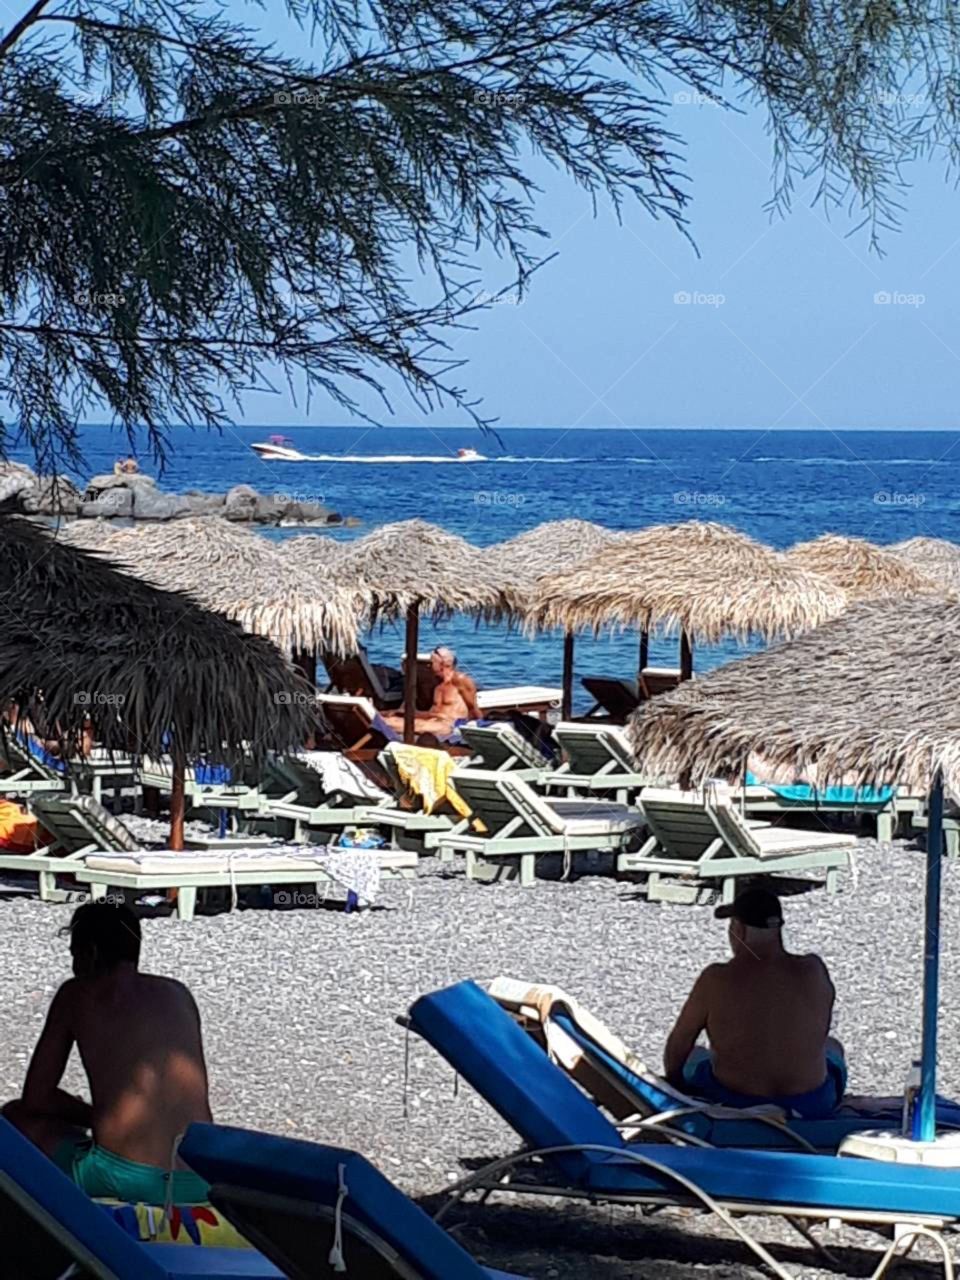 Morning at the sea. Umbrellas and sunbeds waiting for tourists to to be used for relaxing, carefree moments. Beautiful blue sea ready to for watersport lovers...